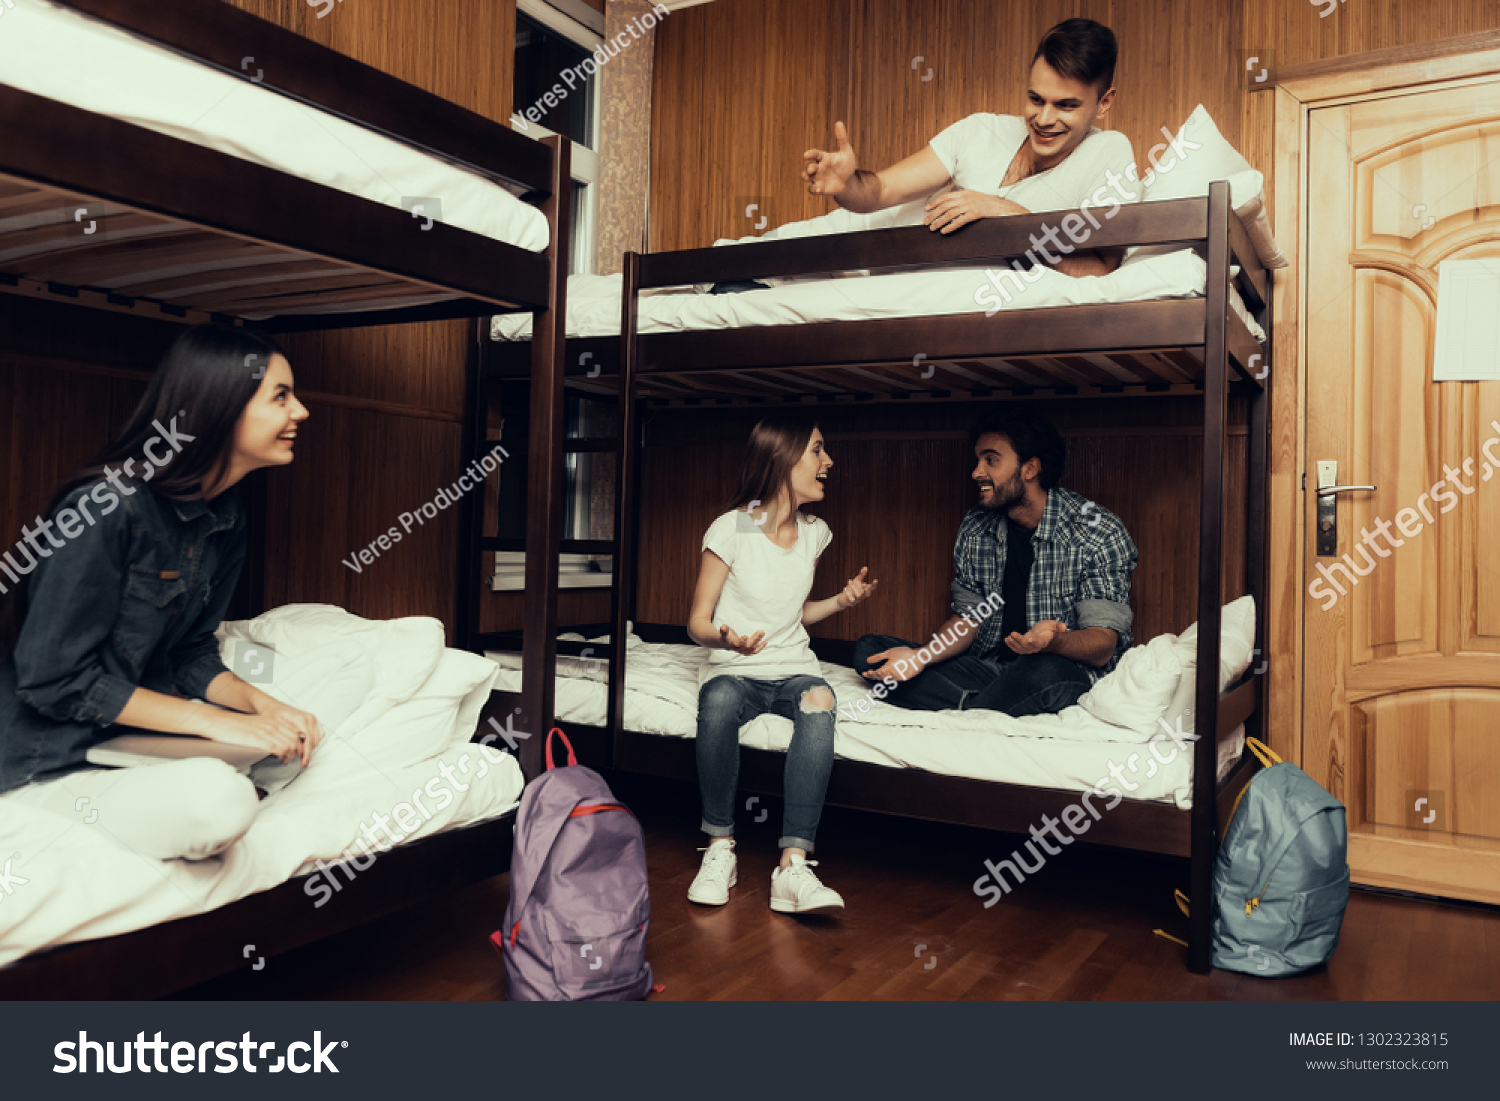 Hostel for Young People. Best Friends Traveling. Small Room in Hostel. spend time Together. bunk beds in room. Friends Sleeping. overnight in Hostel. got up first. sitting with boys. communicate #1302323815